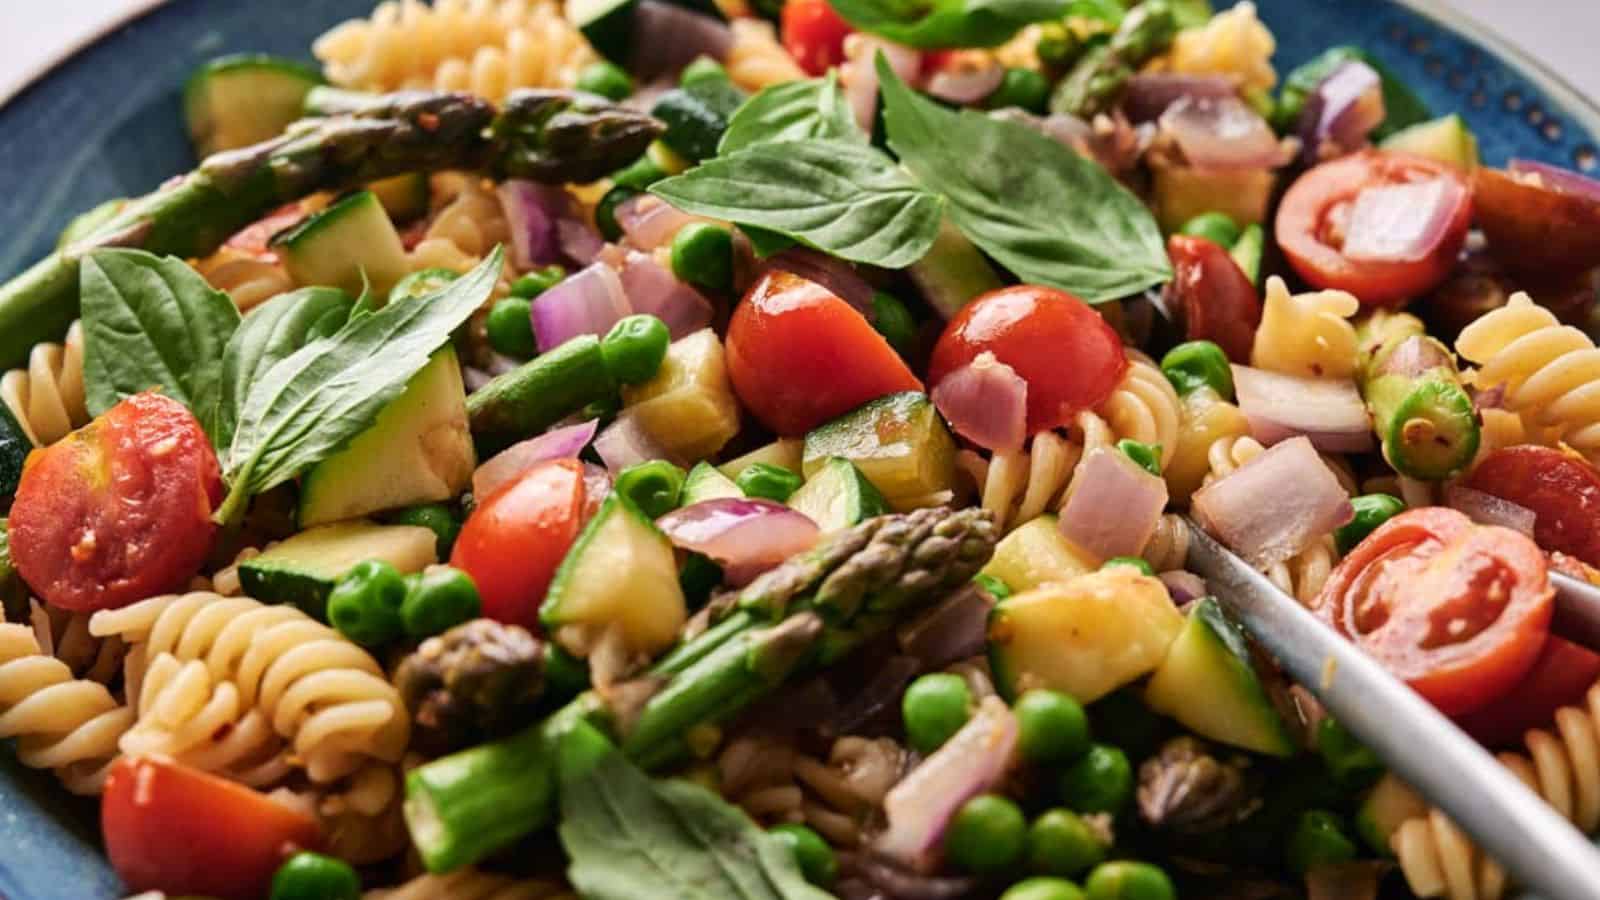 A colorful pasta salad with fusilli, asparagus, cherry tomatoes, peas, red onion, zucchini, and fresh basil leaves is served on a blue plate.